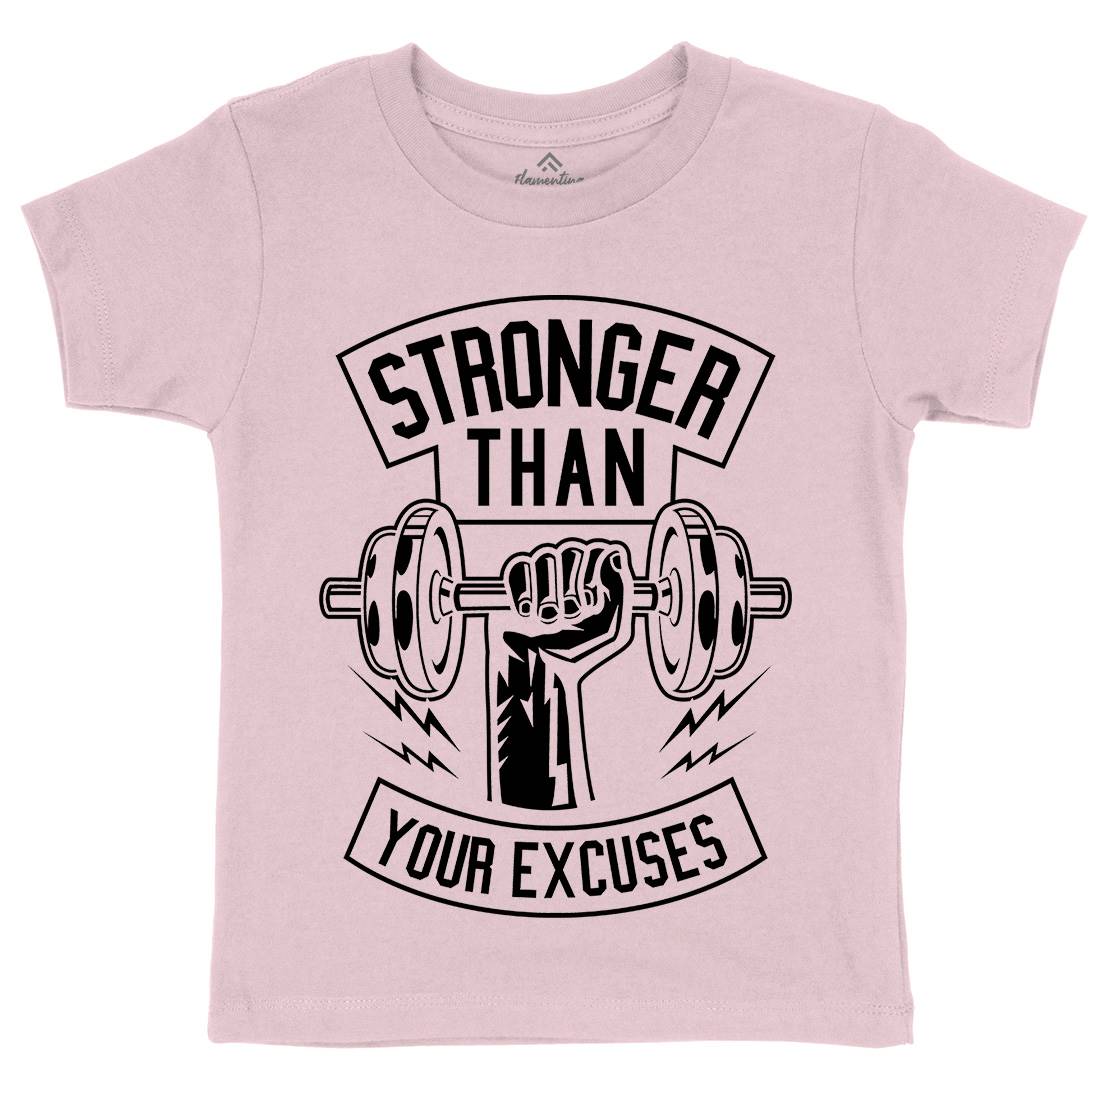 Stronger Than Your Excuses Kids Organic Crew Neck T-Shirt Gym B644